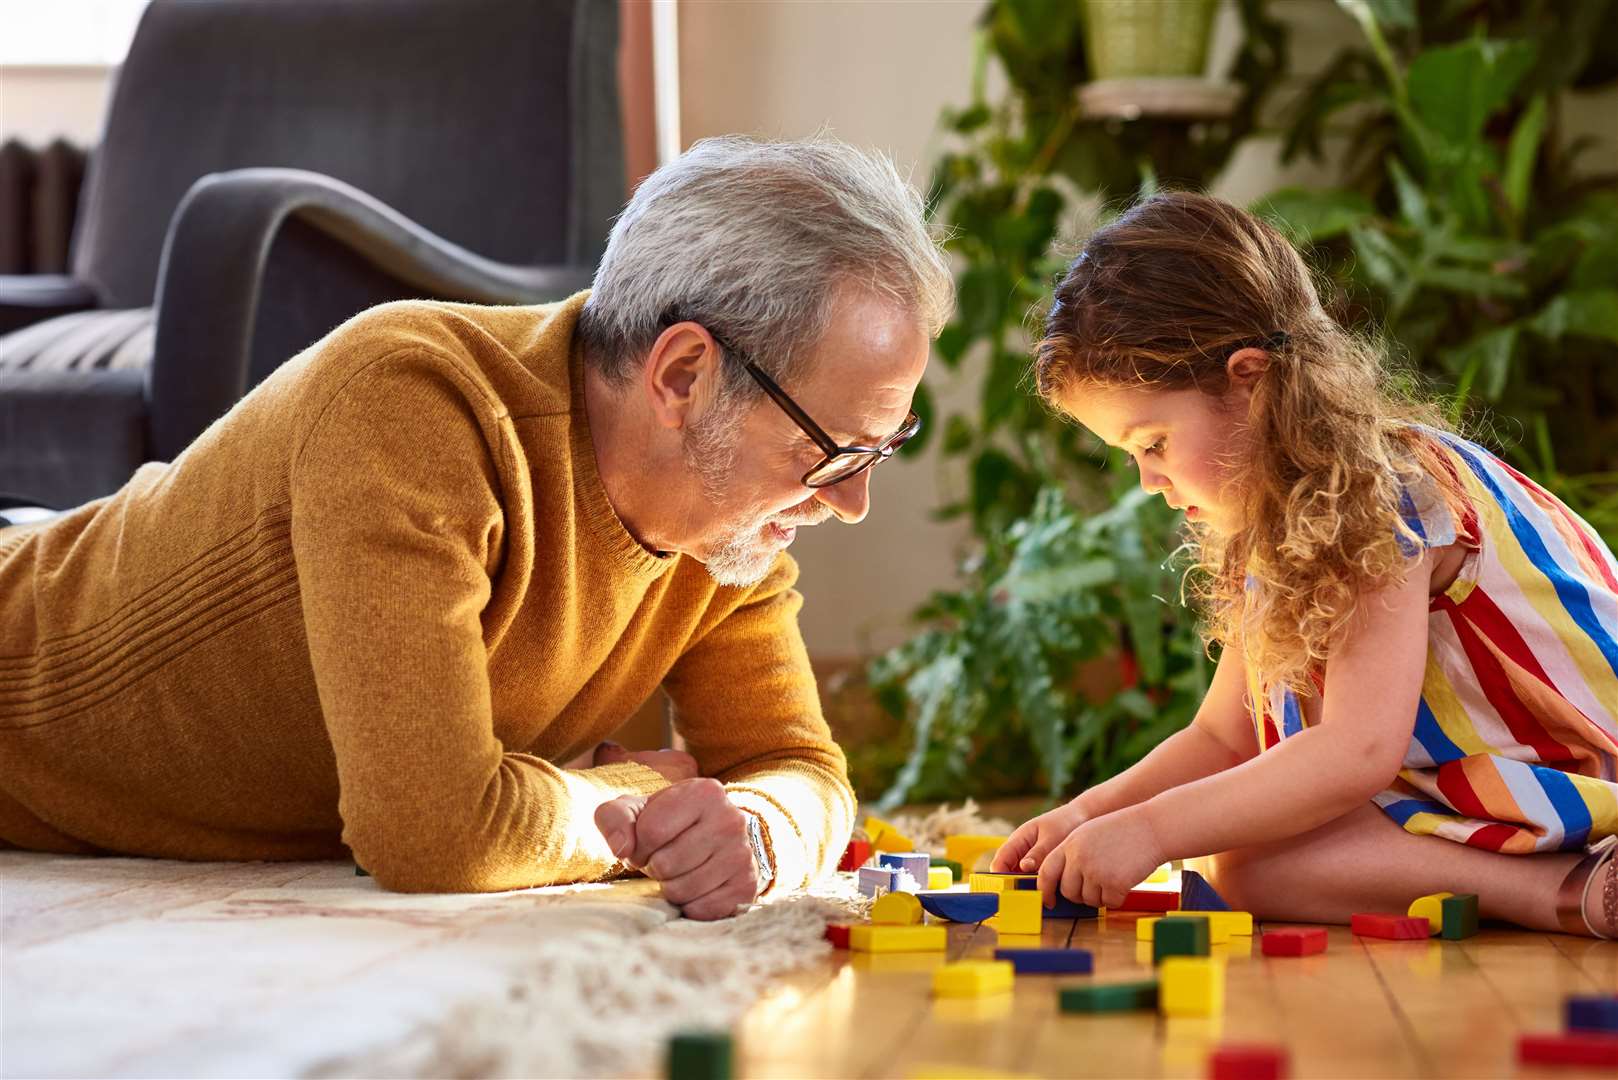 The issue of grandparents' 'rights' has come under close scrutiny over the past few years.